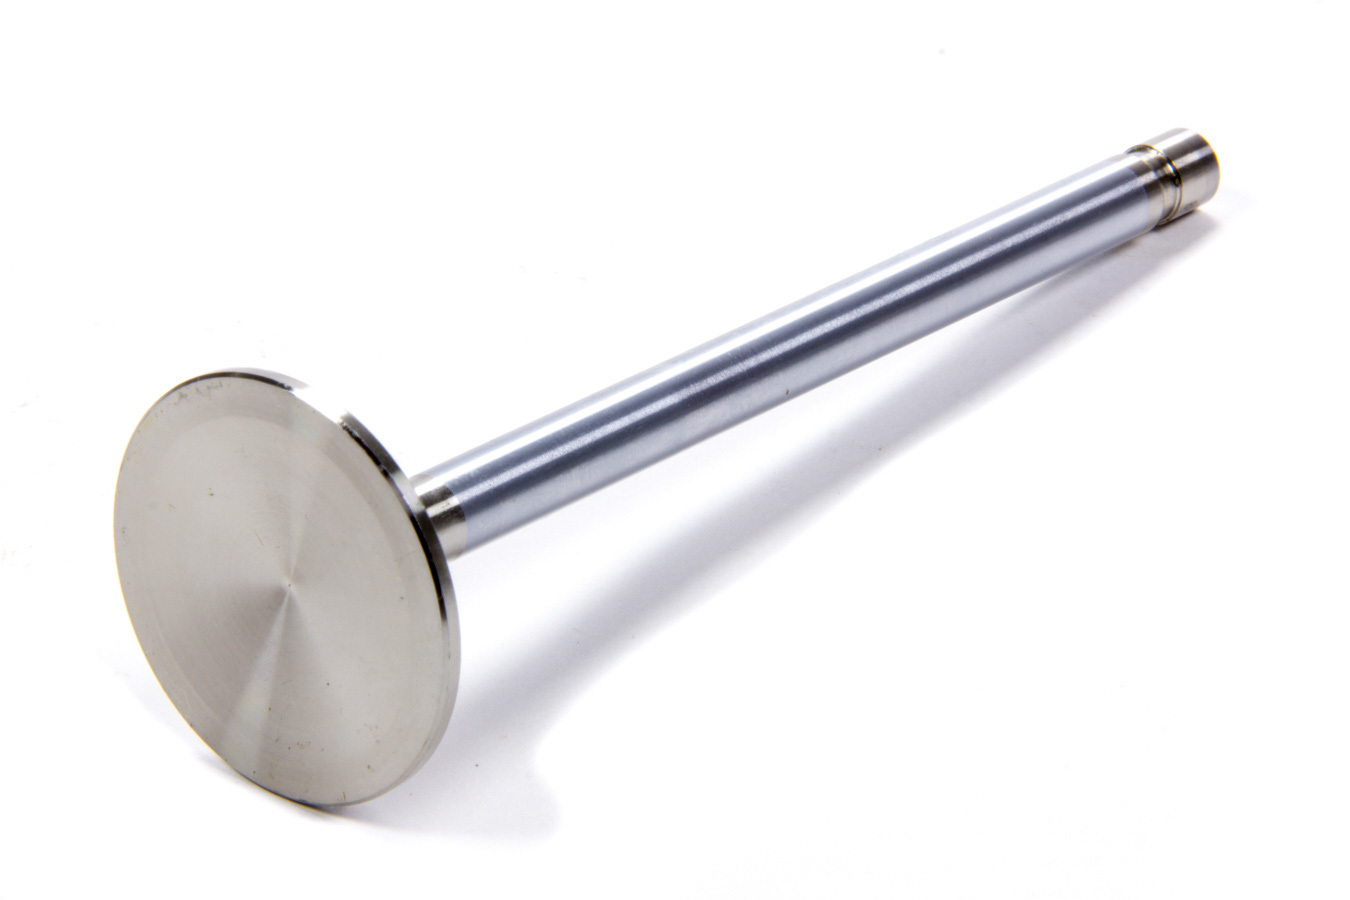 Brodix BR81185 Exhaust Valve, 1.850 in Head, 11/32 in Valve Stem, 5.495 in Long, Stainless, Big Block Chevy, Each